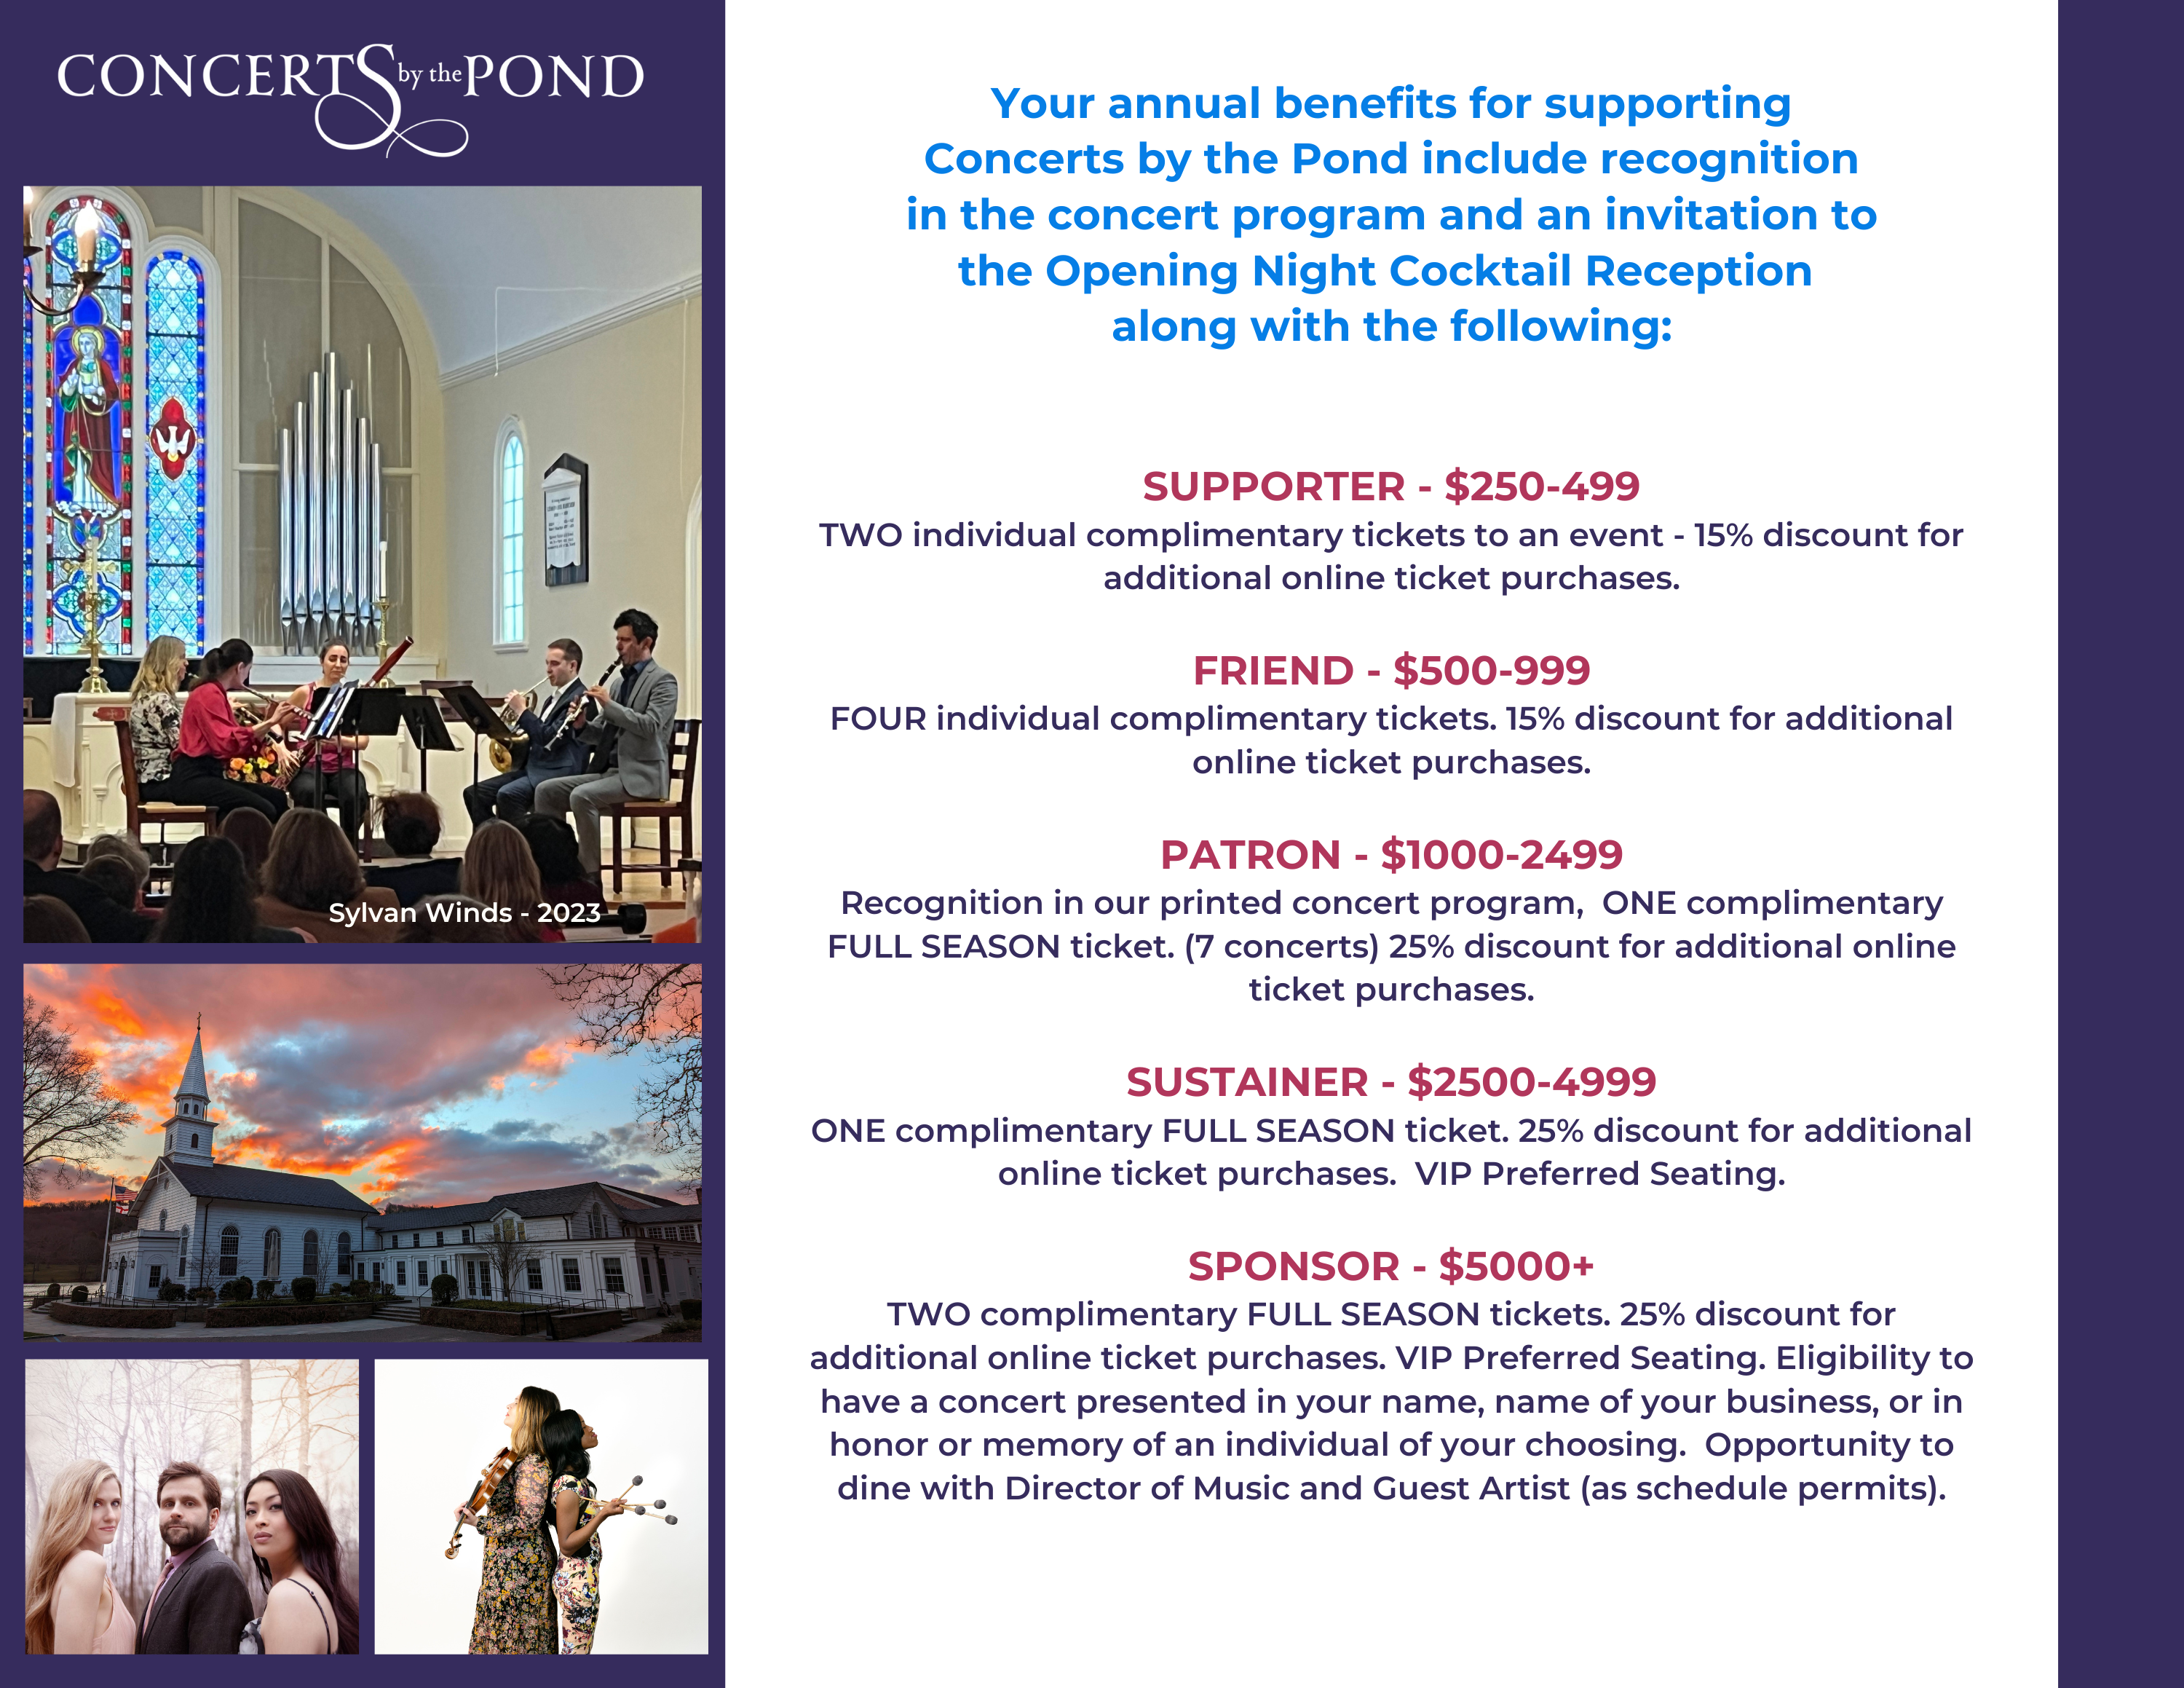 support-your-concerts-by-the-pond-annual-support-of-concerts-by-the-pond-provides-the-financial-cornerstone-for-the-concert-series-only-30-of-season-expenses-are-covered-by-ticket-sales-free-e-1_291